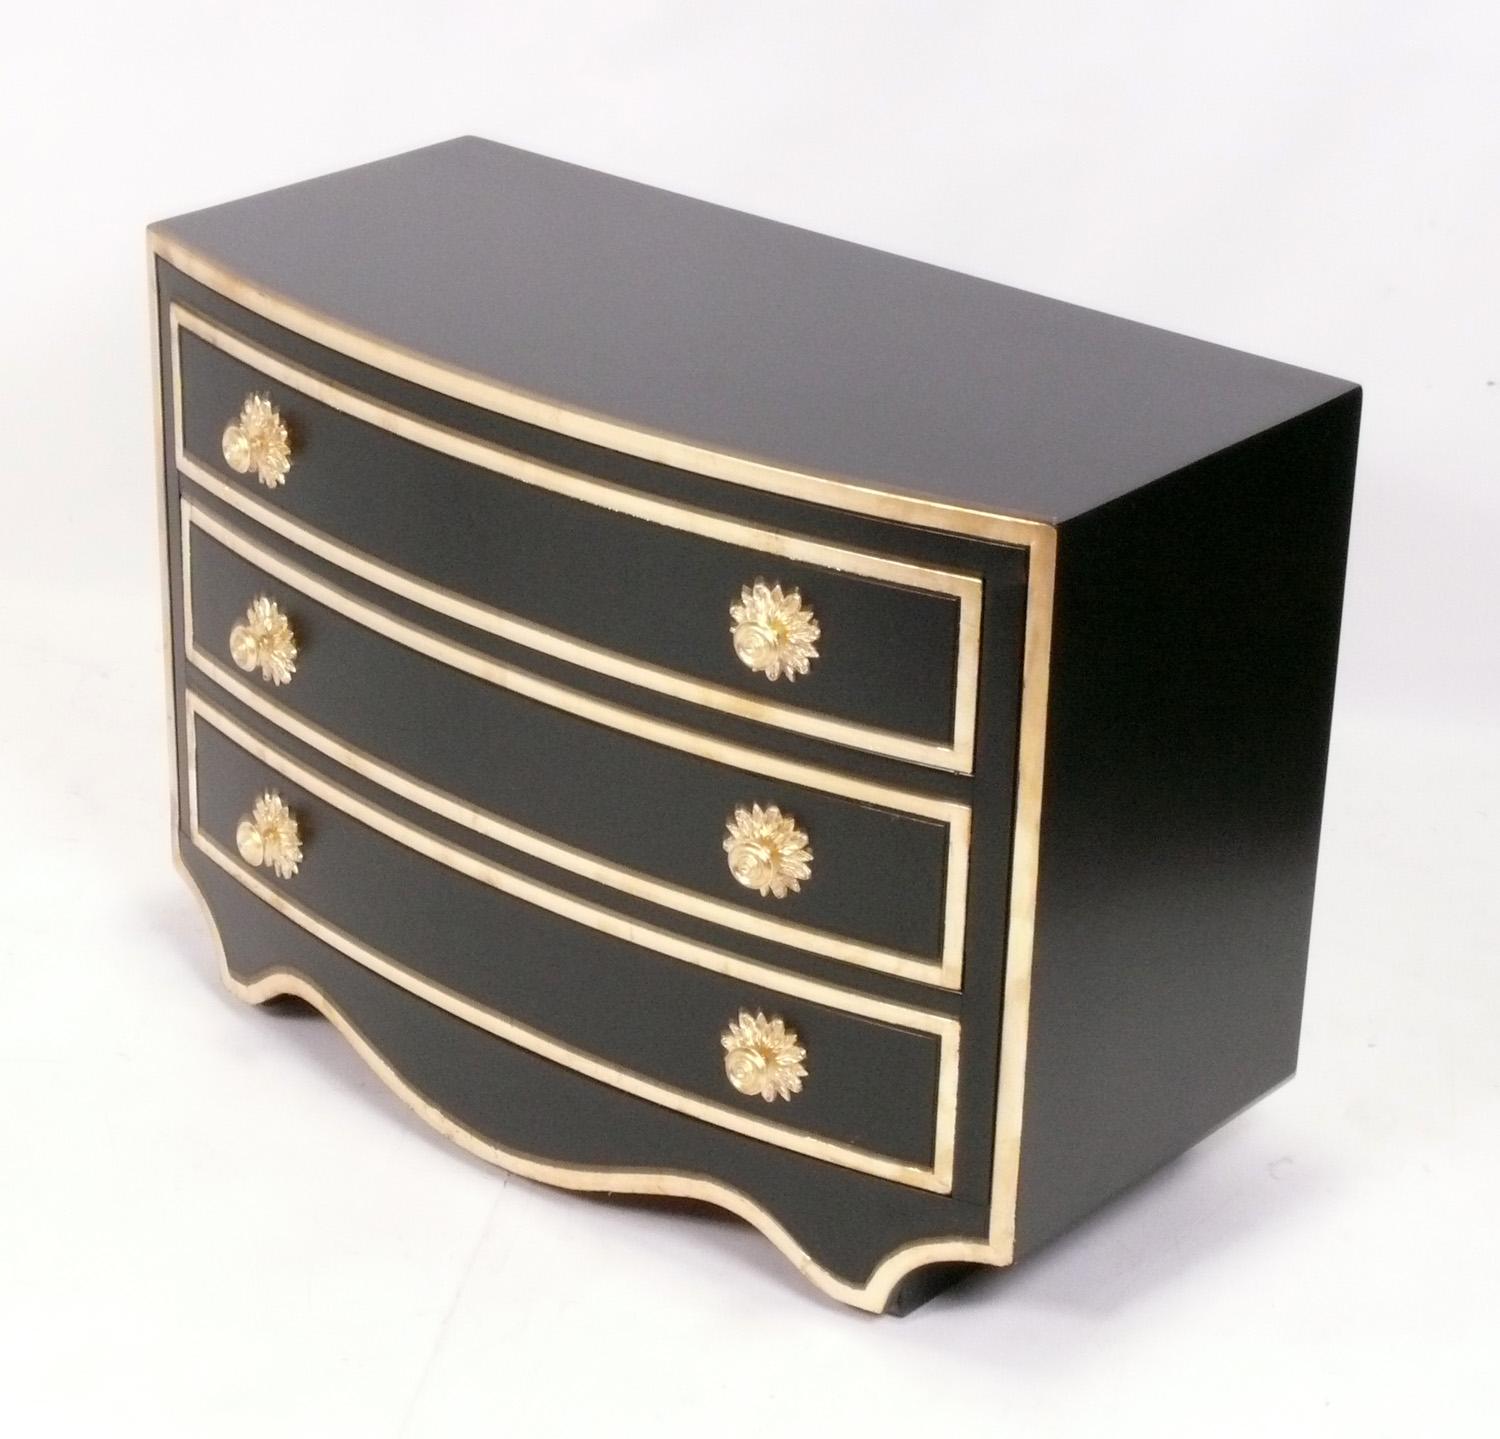 Elegant Chest or Dresser, designed by Dorothy Draper for Henredon's Viennese Line, American, circa 1950s. This chest has recently been completely restored in black lacquer and gold leafed or gilt trim and hardware. 